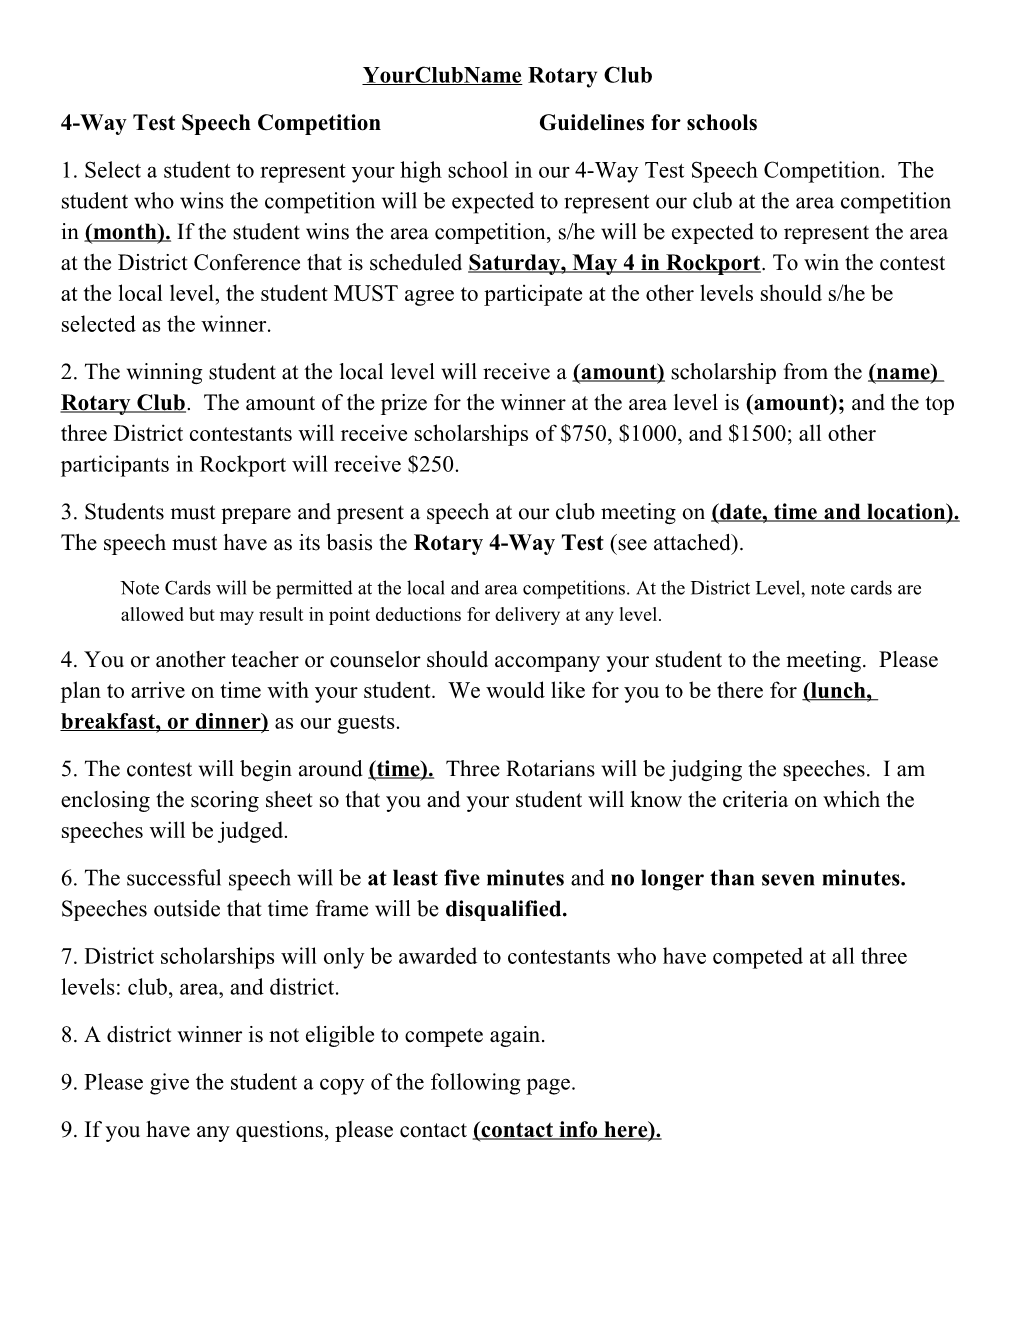 4-Way Test Speech Competition Guidelines for Schools